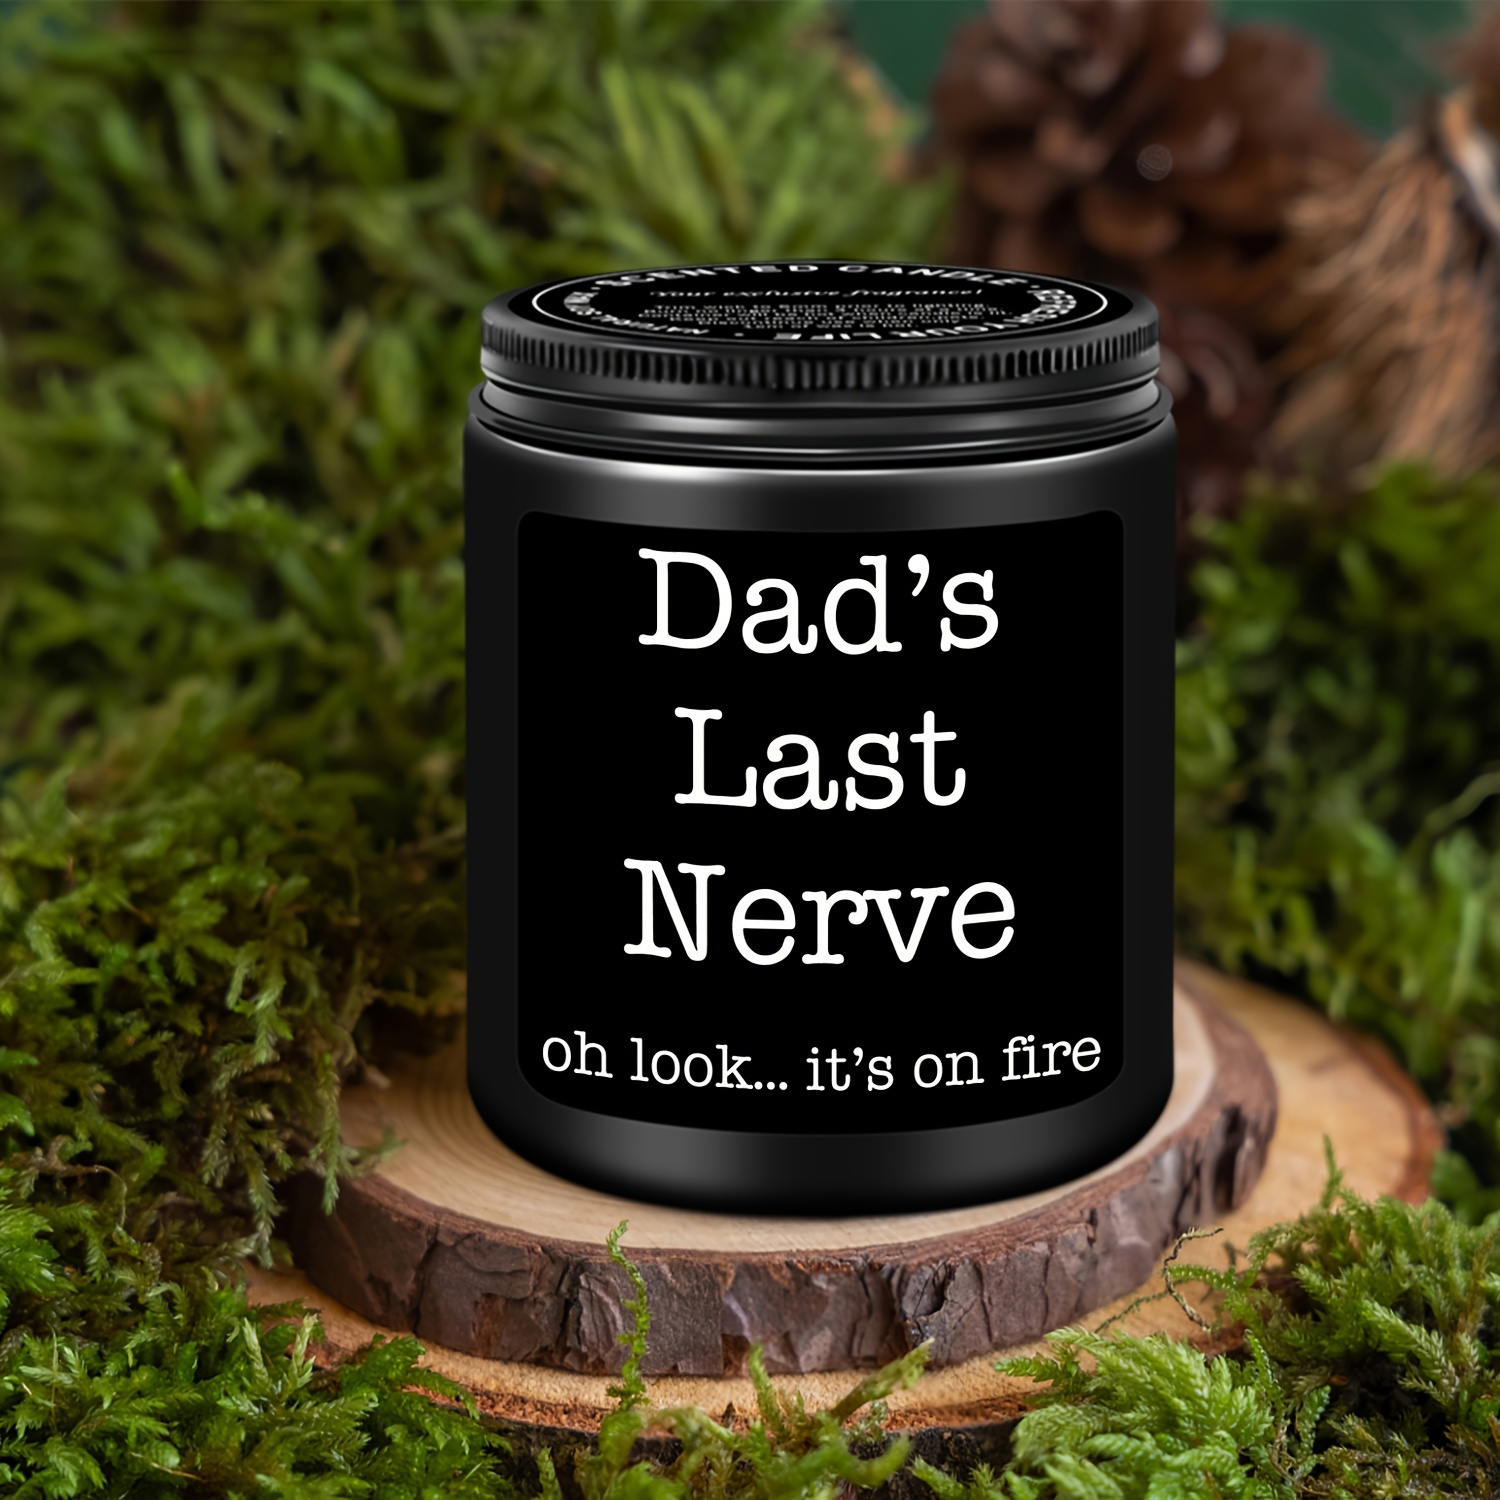 

Gifts For Dad From Daughter And Son, Birthday Gifts For Dad, Gifts For Dads Who Don’t Want Anything, Christmas Gifts For Step Dad And Adoptive Dad On Father’s Day, Sandalwood Scented Candle 200g/7oz